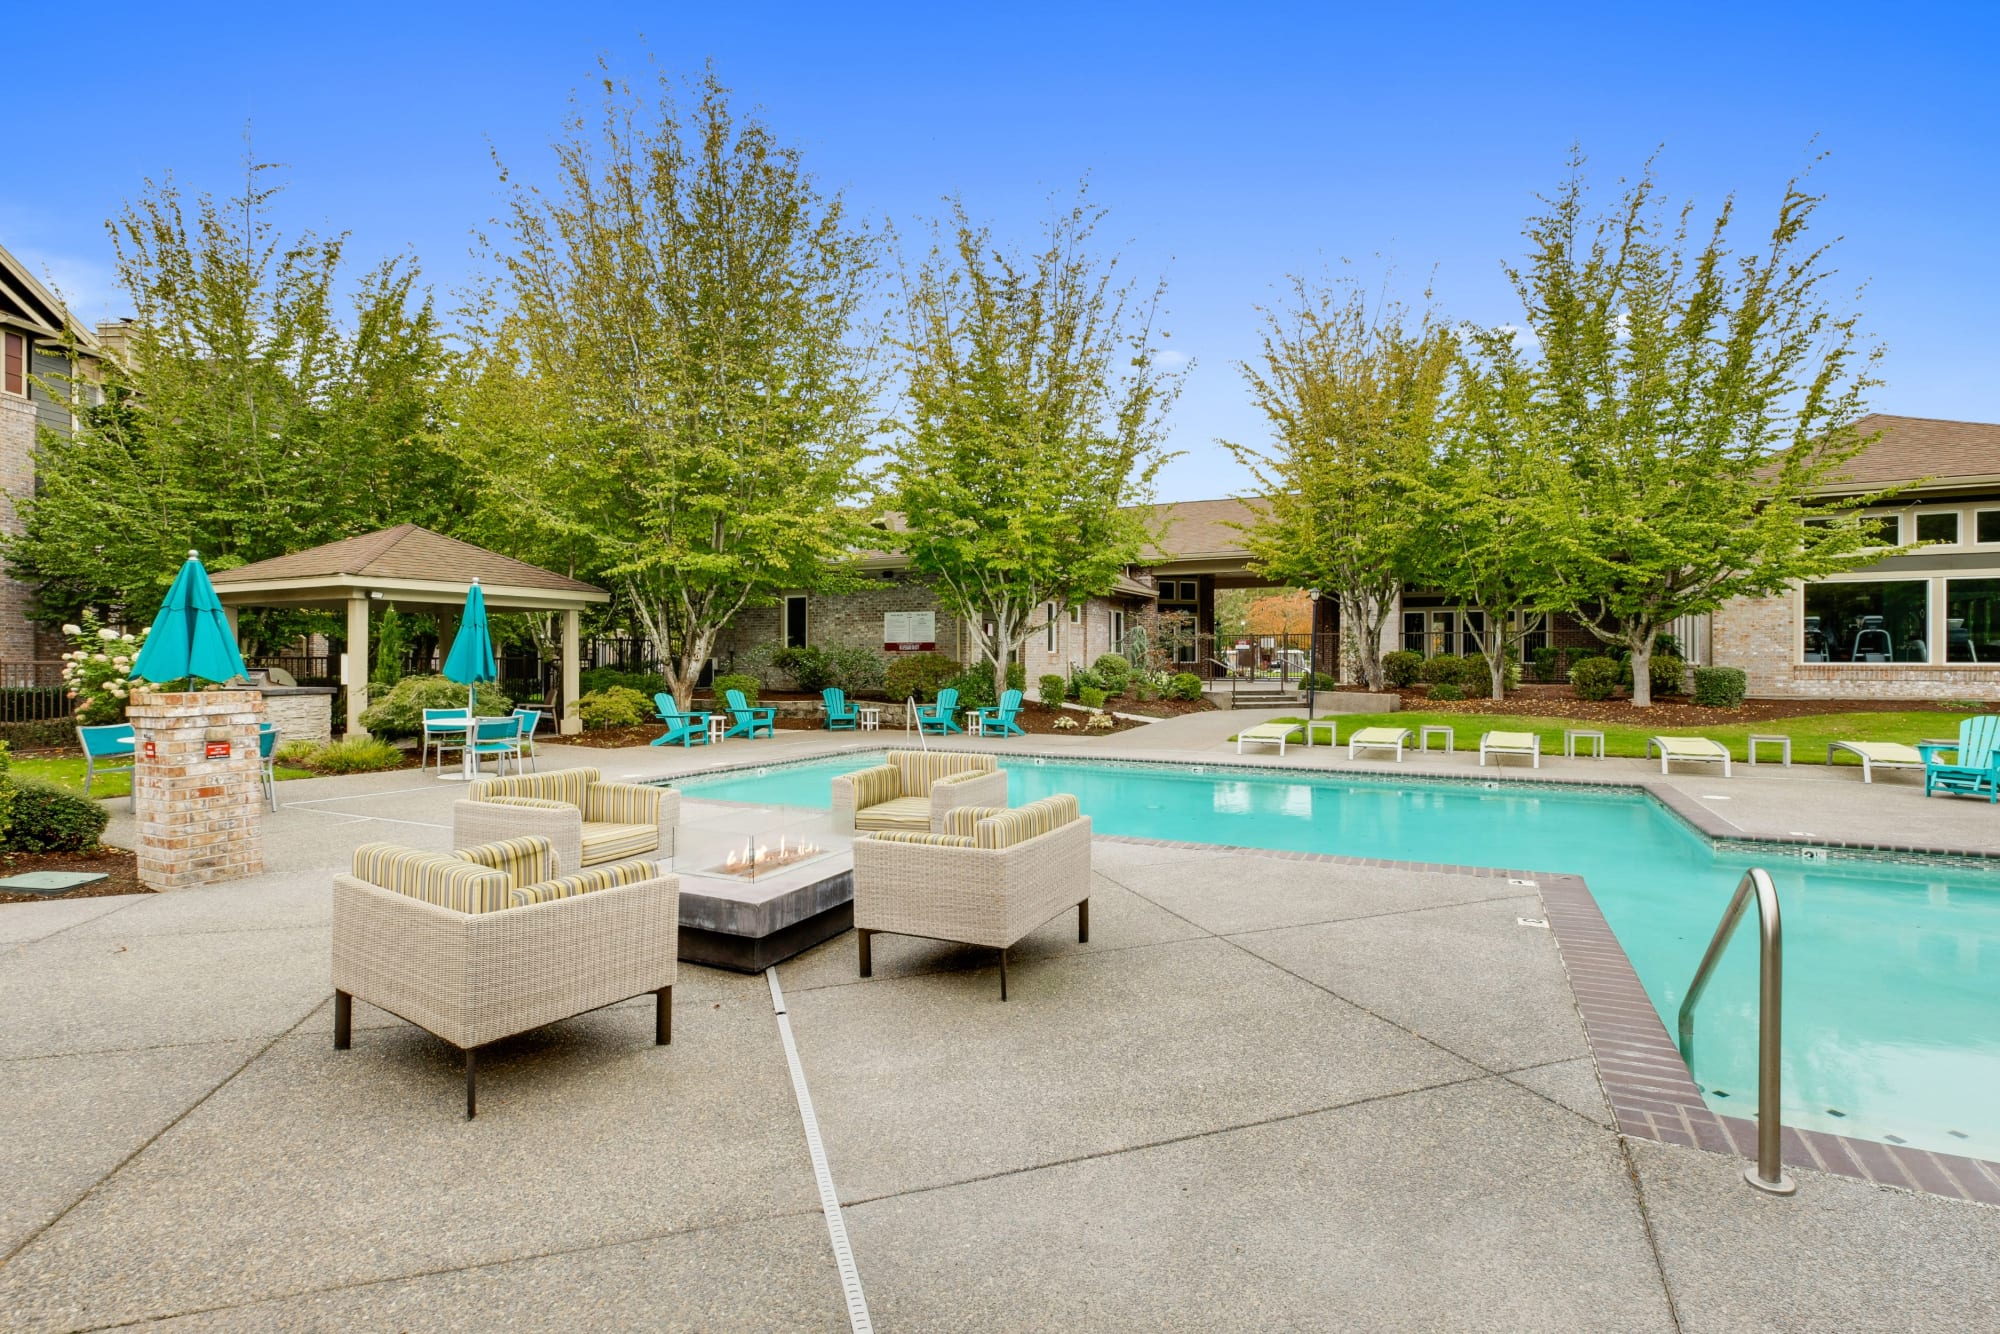 A fire pit surrounded by large chairs, poolside at The Grove at Orenco Station in Hillsboro, Oregon